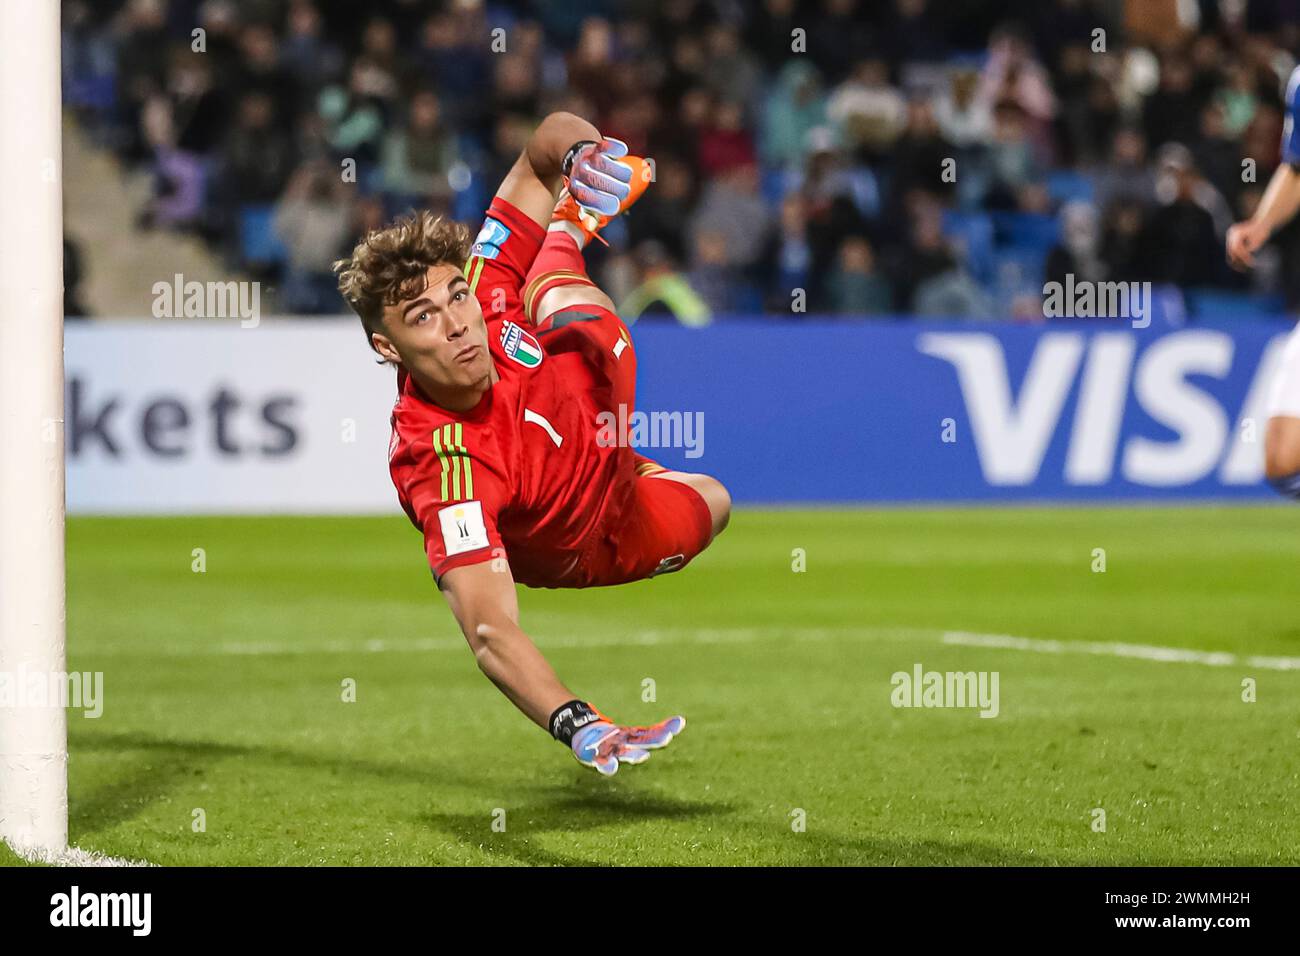 MENDOZA, ARGENTINA - MAY 21: Goalkeeper Sebastiano Desplanches of Italy during FIFA U20 World Cup Argentina 2023 match between Italy and Brazil at Est Stock Photo